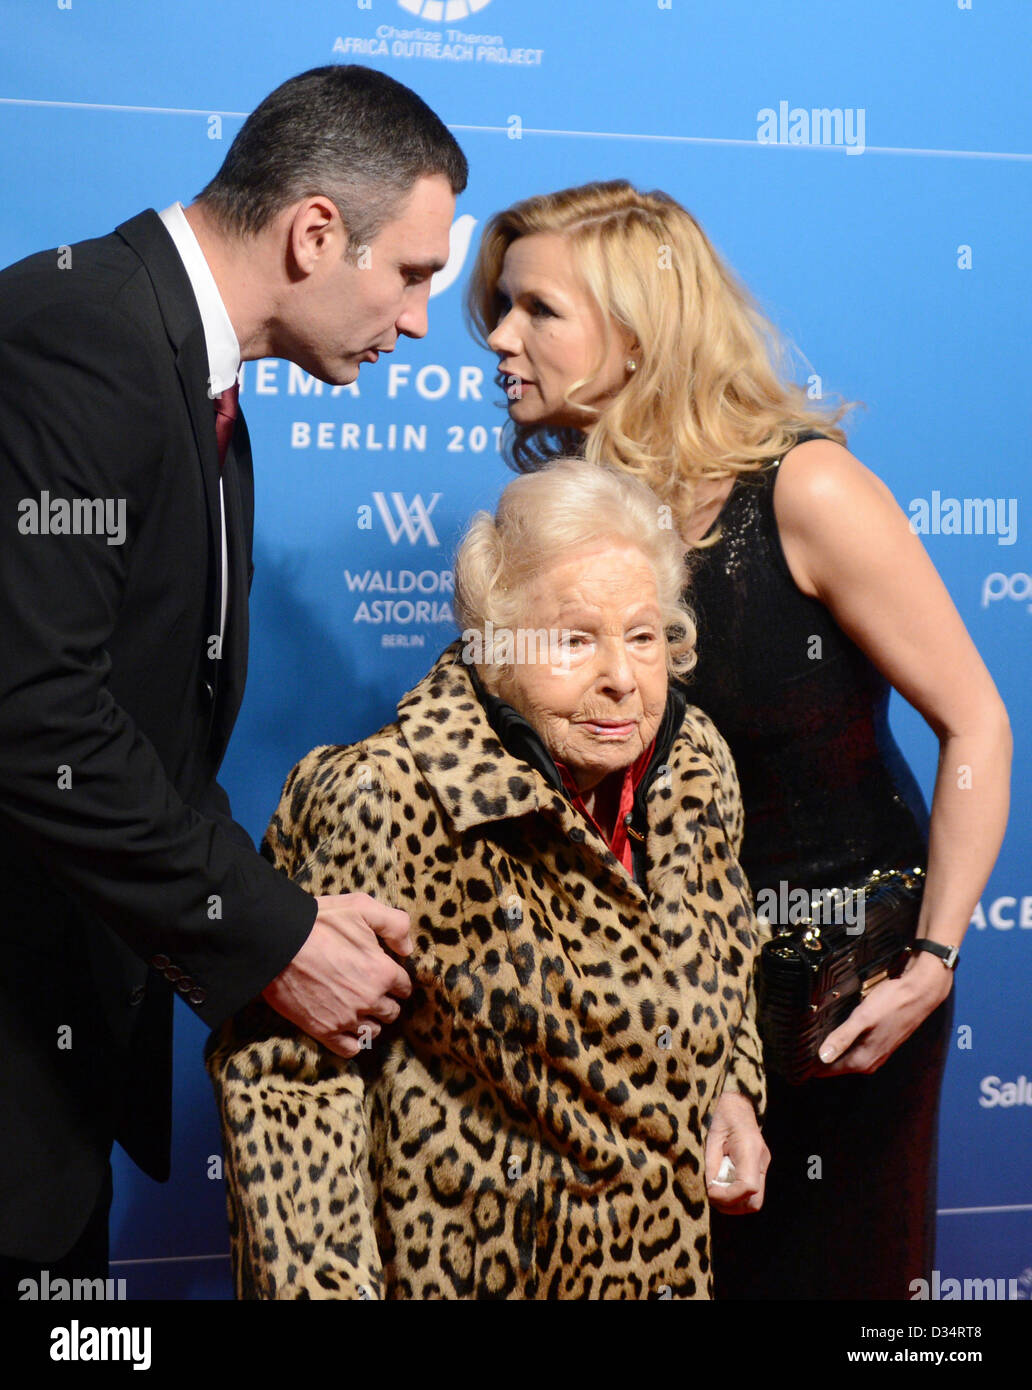 Ukranian boxer and politician Vitali Klitschko (L), Holocaust survivor Marga Spiegel (C) and actress Veronica Ferres  arrive for the charity event Cinema For Peace within the scope of the 63rd Berlin International Film Festival aka Berlinale in Berlin, Germany, 09 February 2013. Since 2002, Cinema for Peace has been a worldwide initiative, promoting humanity through film while inviting members of the international film community to attend the annual Cinema for Peace Award-Gala-Night during the Berlin International Film Festival. Photo: Jens Kalaene dpa +++(c) dpa - Bildfunk+++ Stock Photo